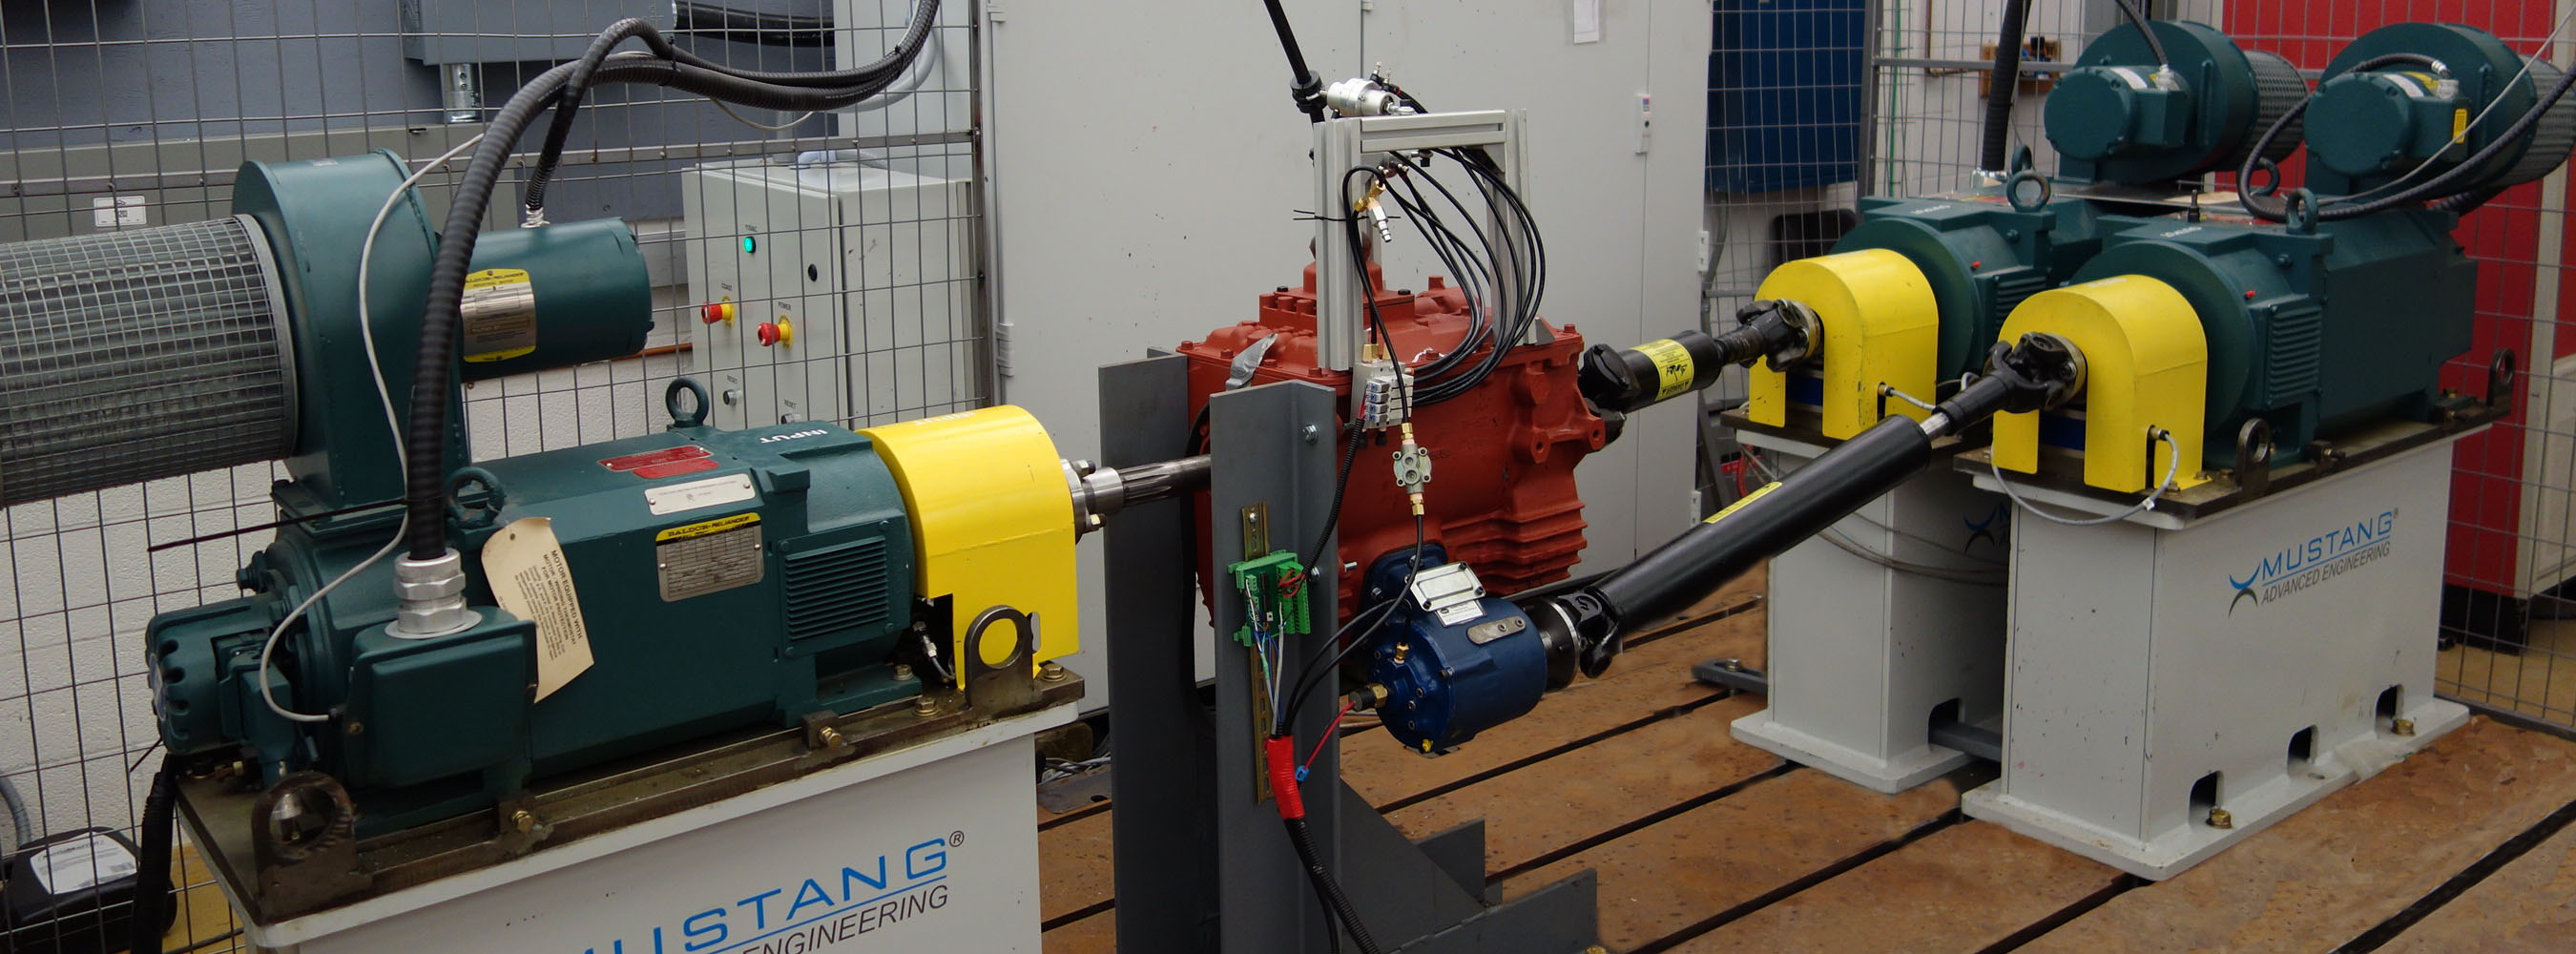 Three dynamometer system for powertrain and anti-idling testing.